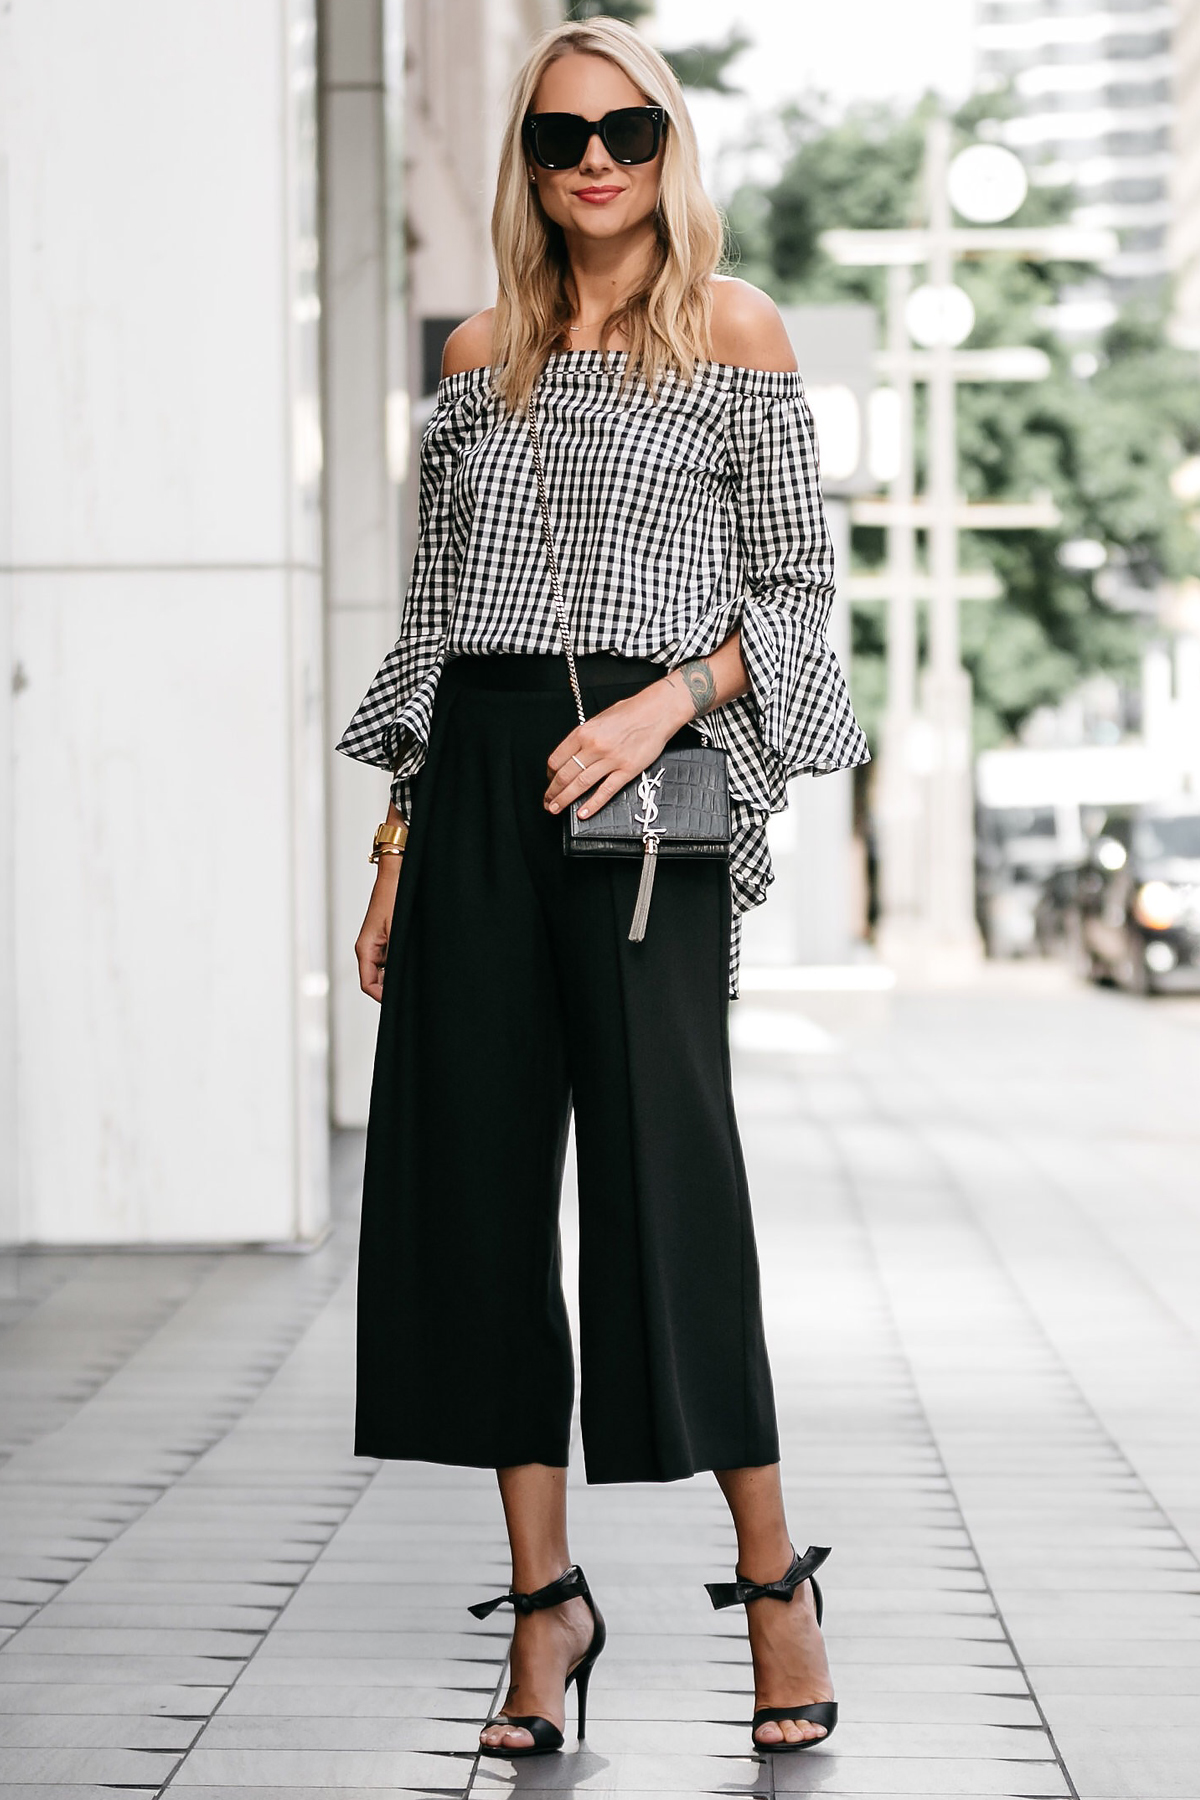 Blonde woman wearing nordstrom gingham off-the-shoulder top topshop black culottes outfit black bow heels ysl crossbody street style dallas blogger fashion blogger